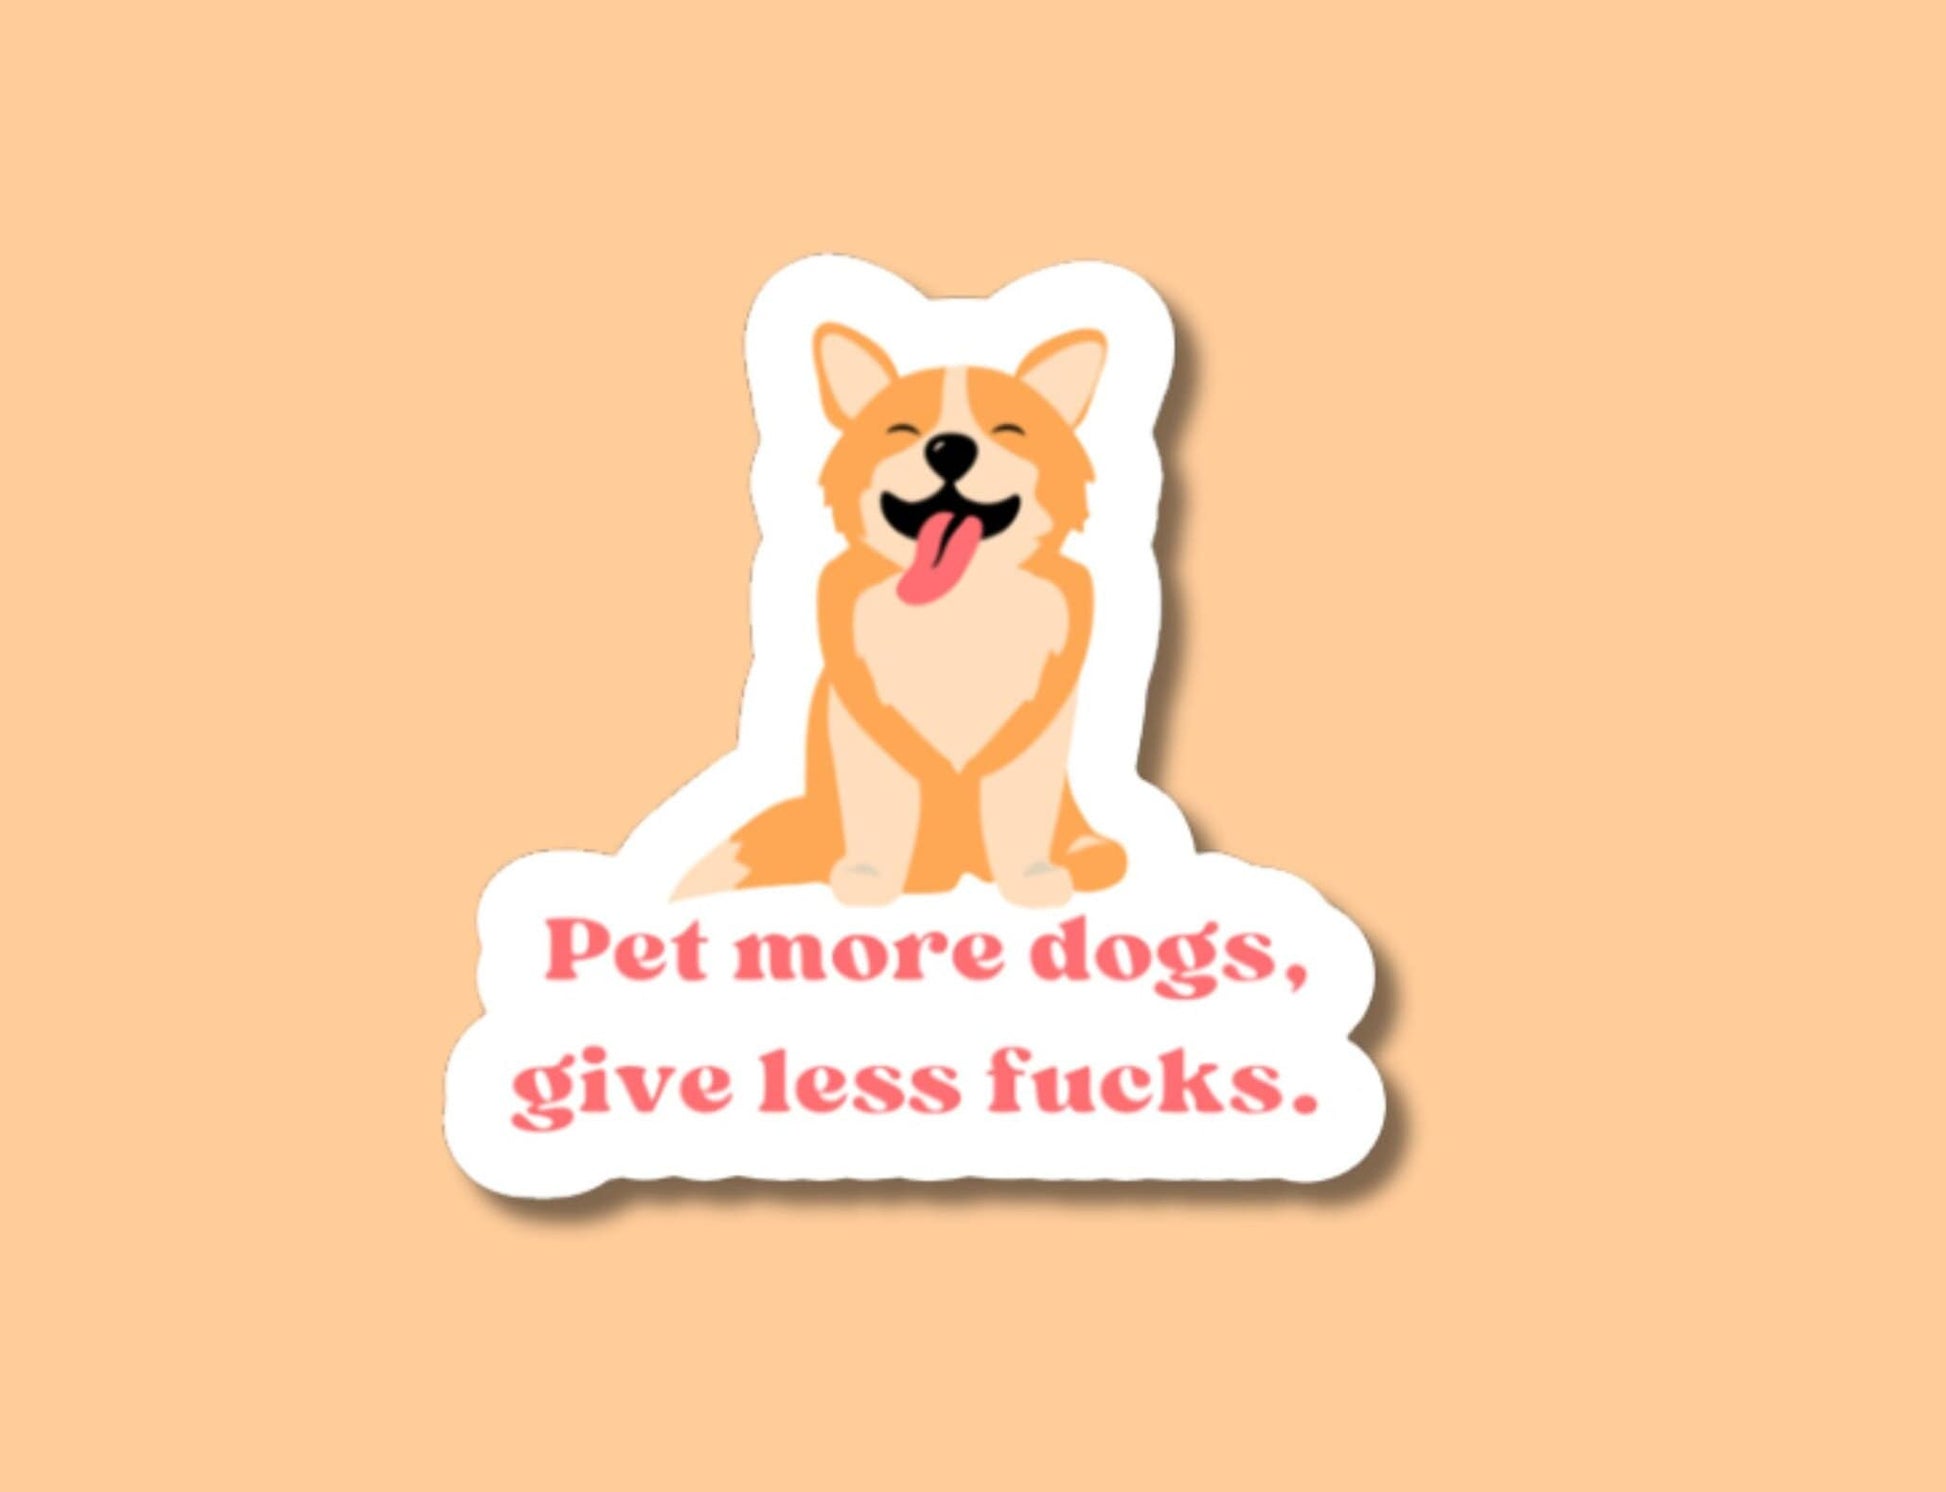 pet more dogs give less fucks, dog stickers, dog lover gifts, pet shop stickers, dog mom, dogs over people, goldendoodle, husky sticker